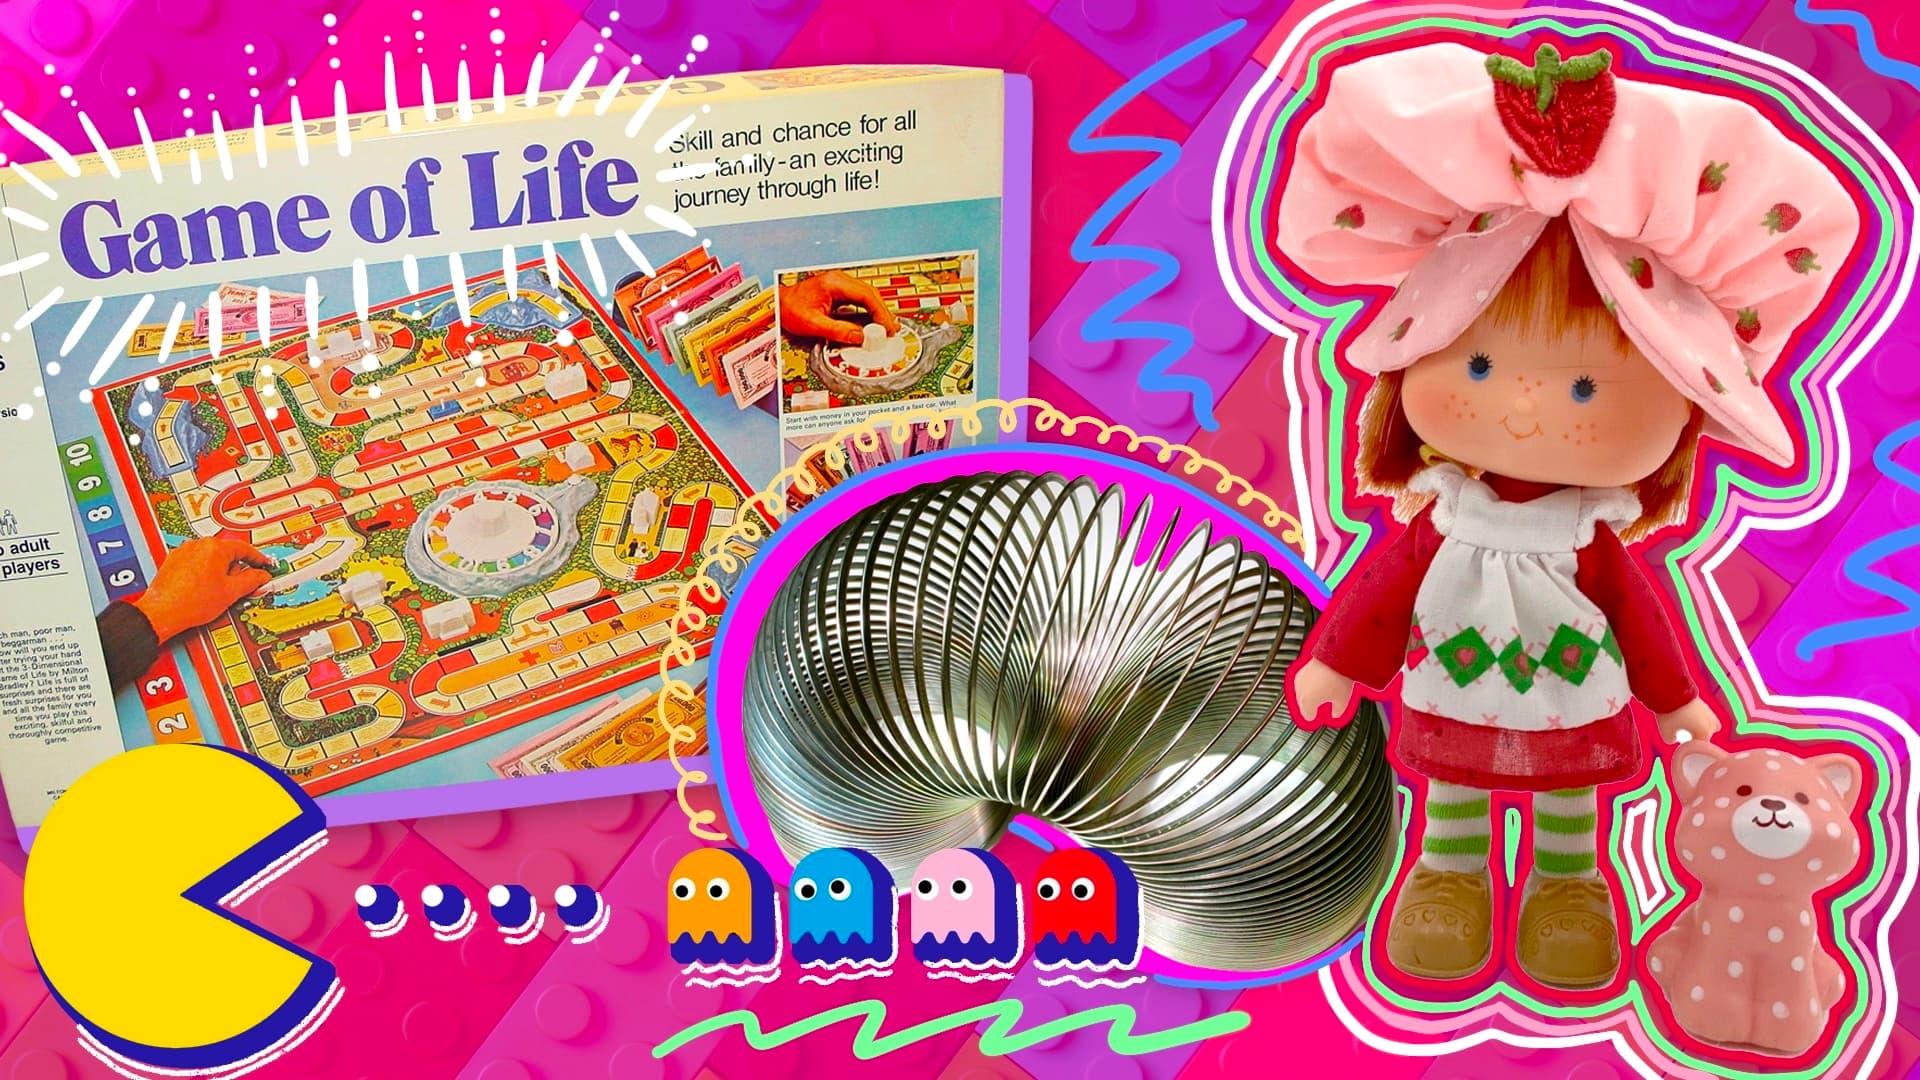 Collage of toys and games: Life board game, slinky, Cabbage Patch doll, Pac-man